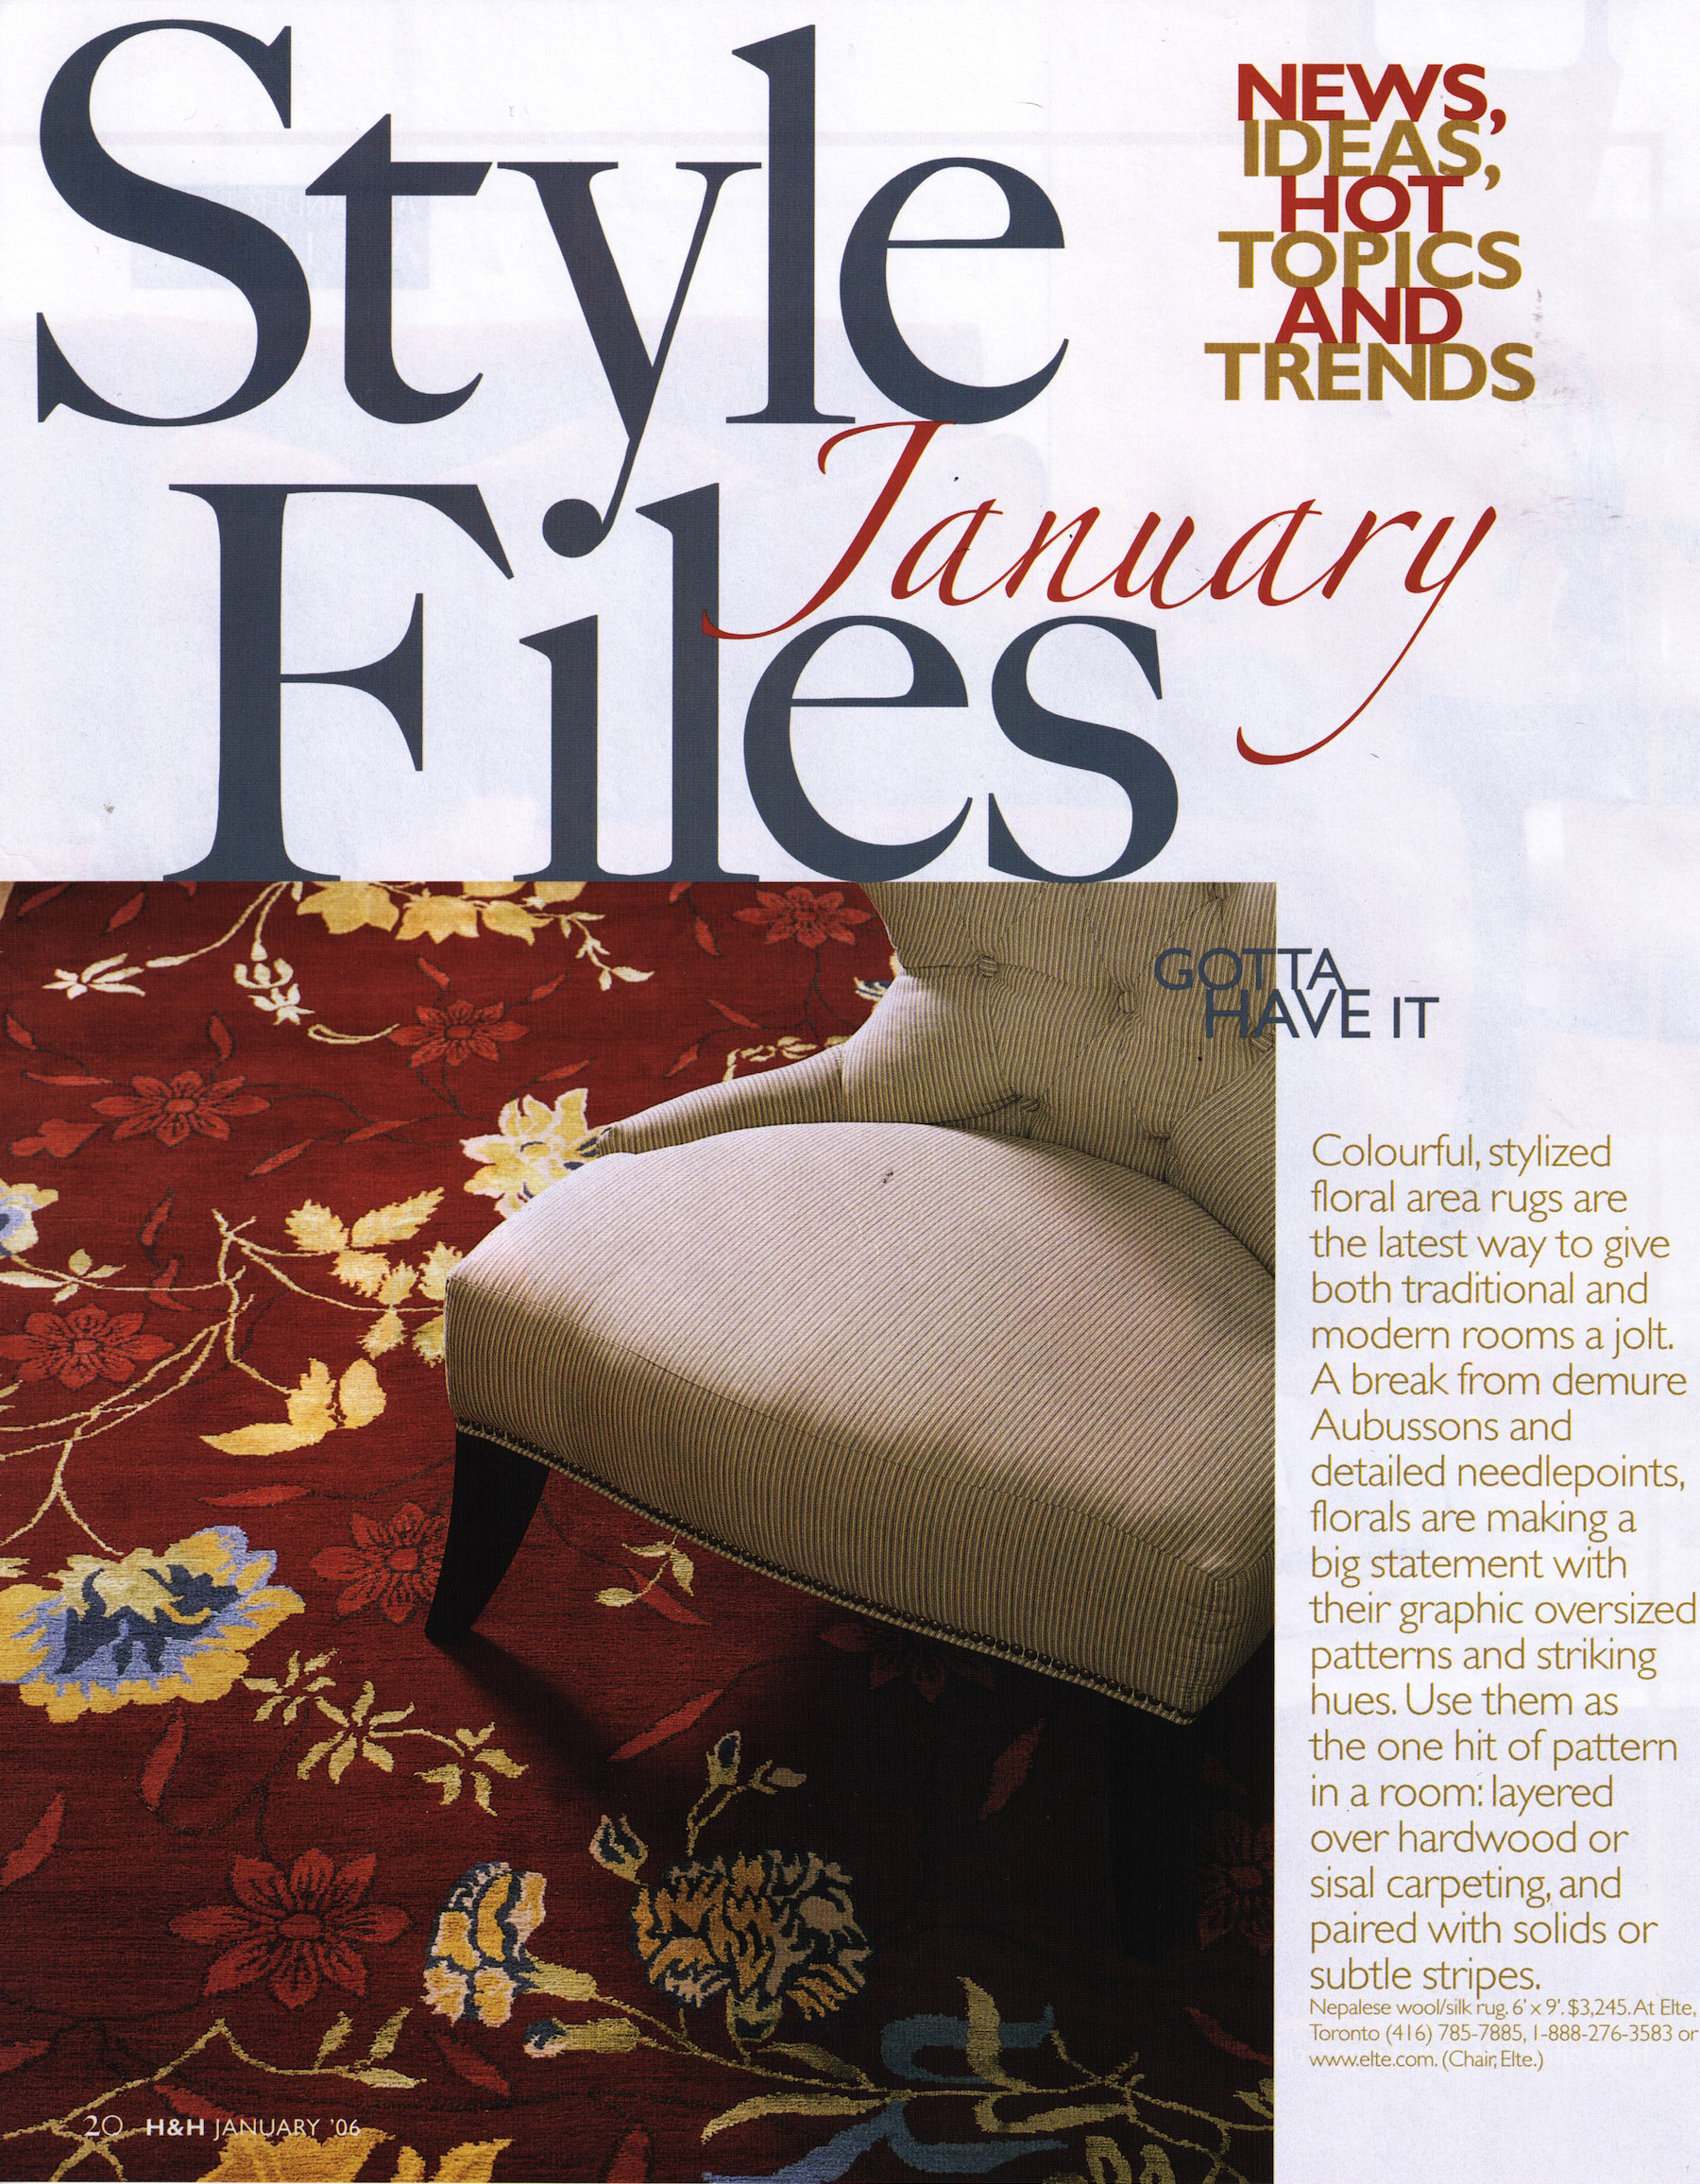 The 'Style Files' page from the January 2016 issue of House and Home magazine featuring a carpet by Elte. | Scanned image of the magazine by The Ruggist.